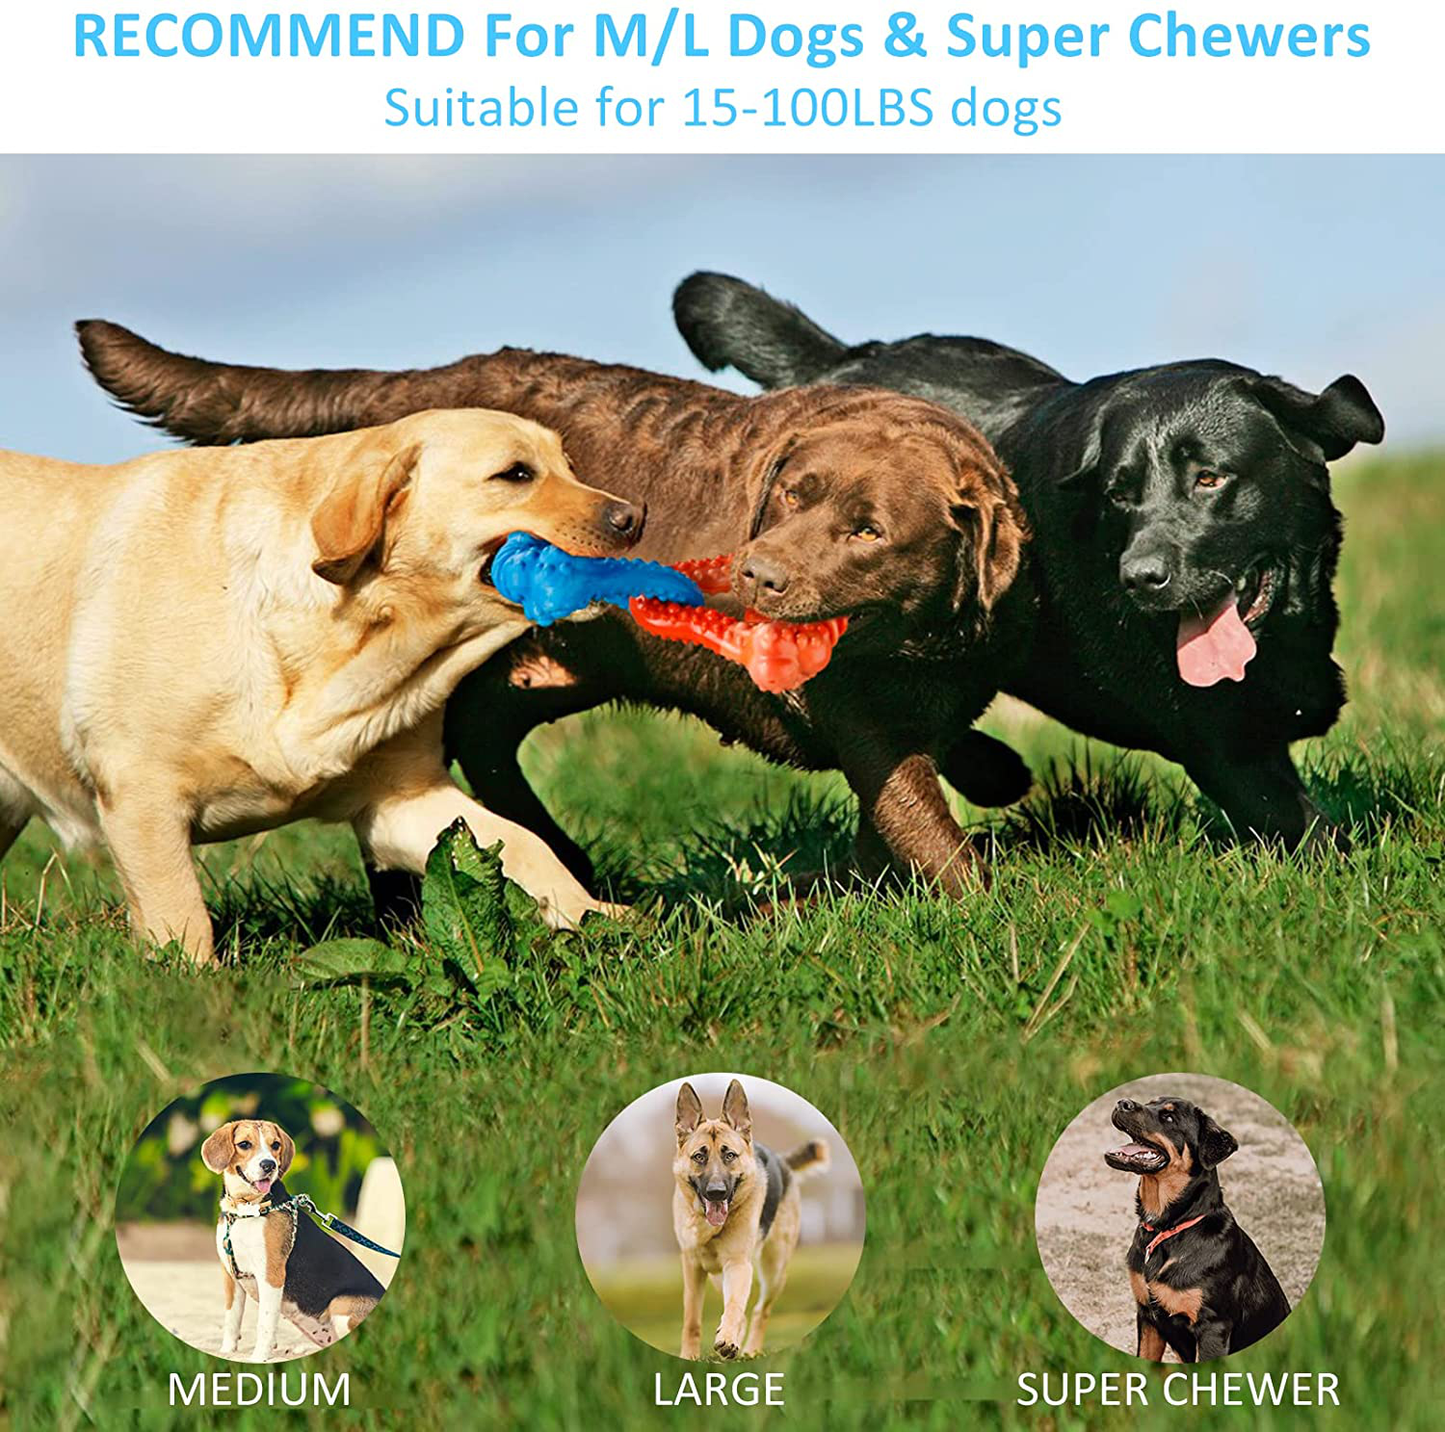 Nibee Dog Toys for Aggressive Chewers, Indestructible Dog Chew Toys for Aggressive Chewers, Tough Durable Tug of War Dog Toys for Medium Large Dogs, Made with Nylon and Natural Rubber, Bacon Flavored Animals & Pet Supplies > Pet Supplies > Dog Supplies > Dog Toys Nibee   